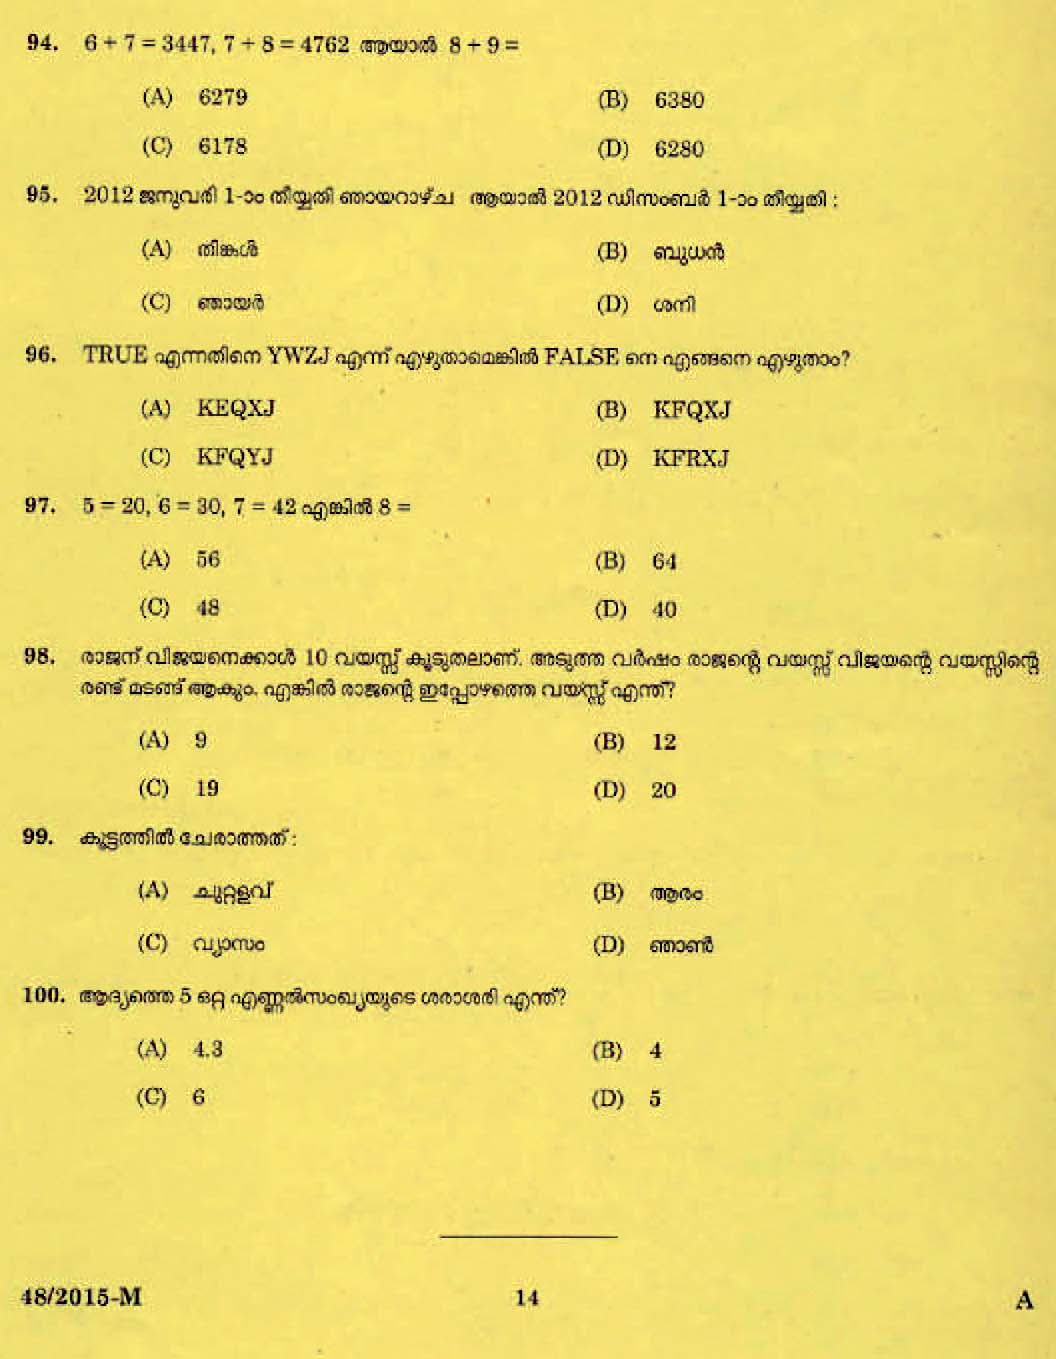 LD Clerk Bill Collector Question Paper Malayalam 2015 Paper Code 482015 M 12